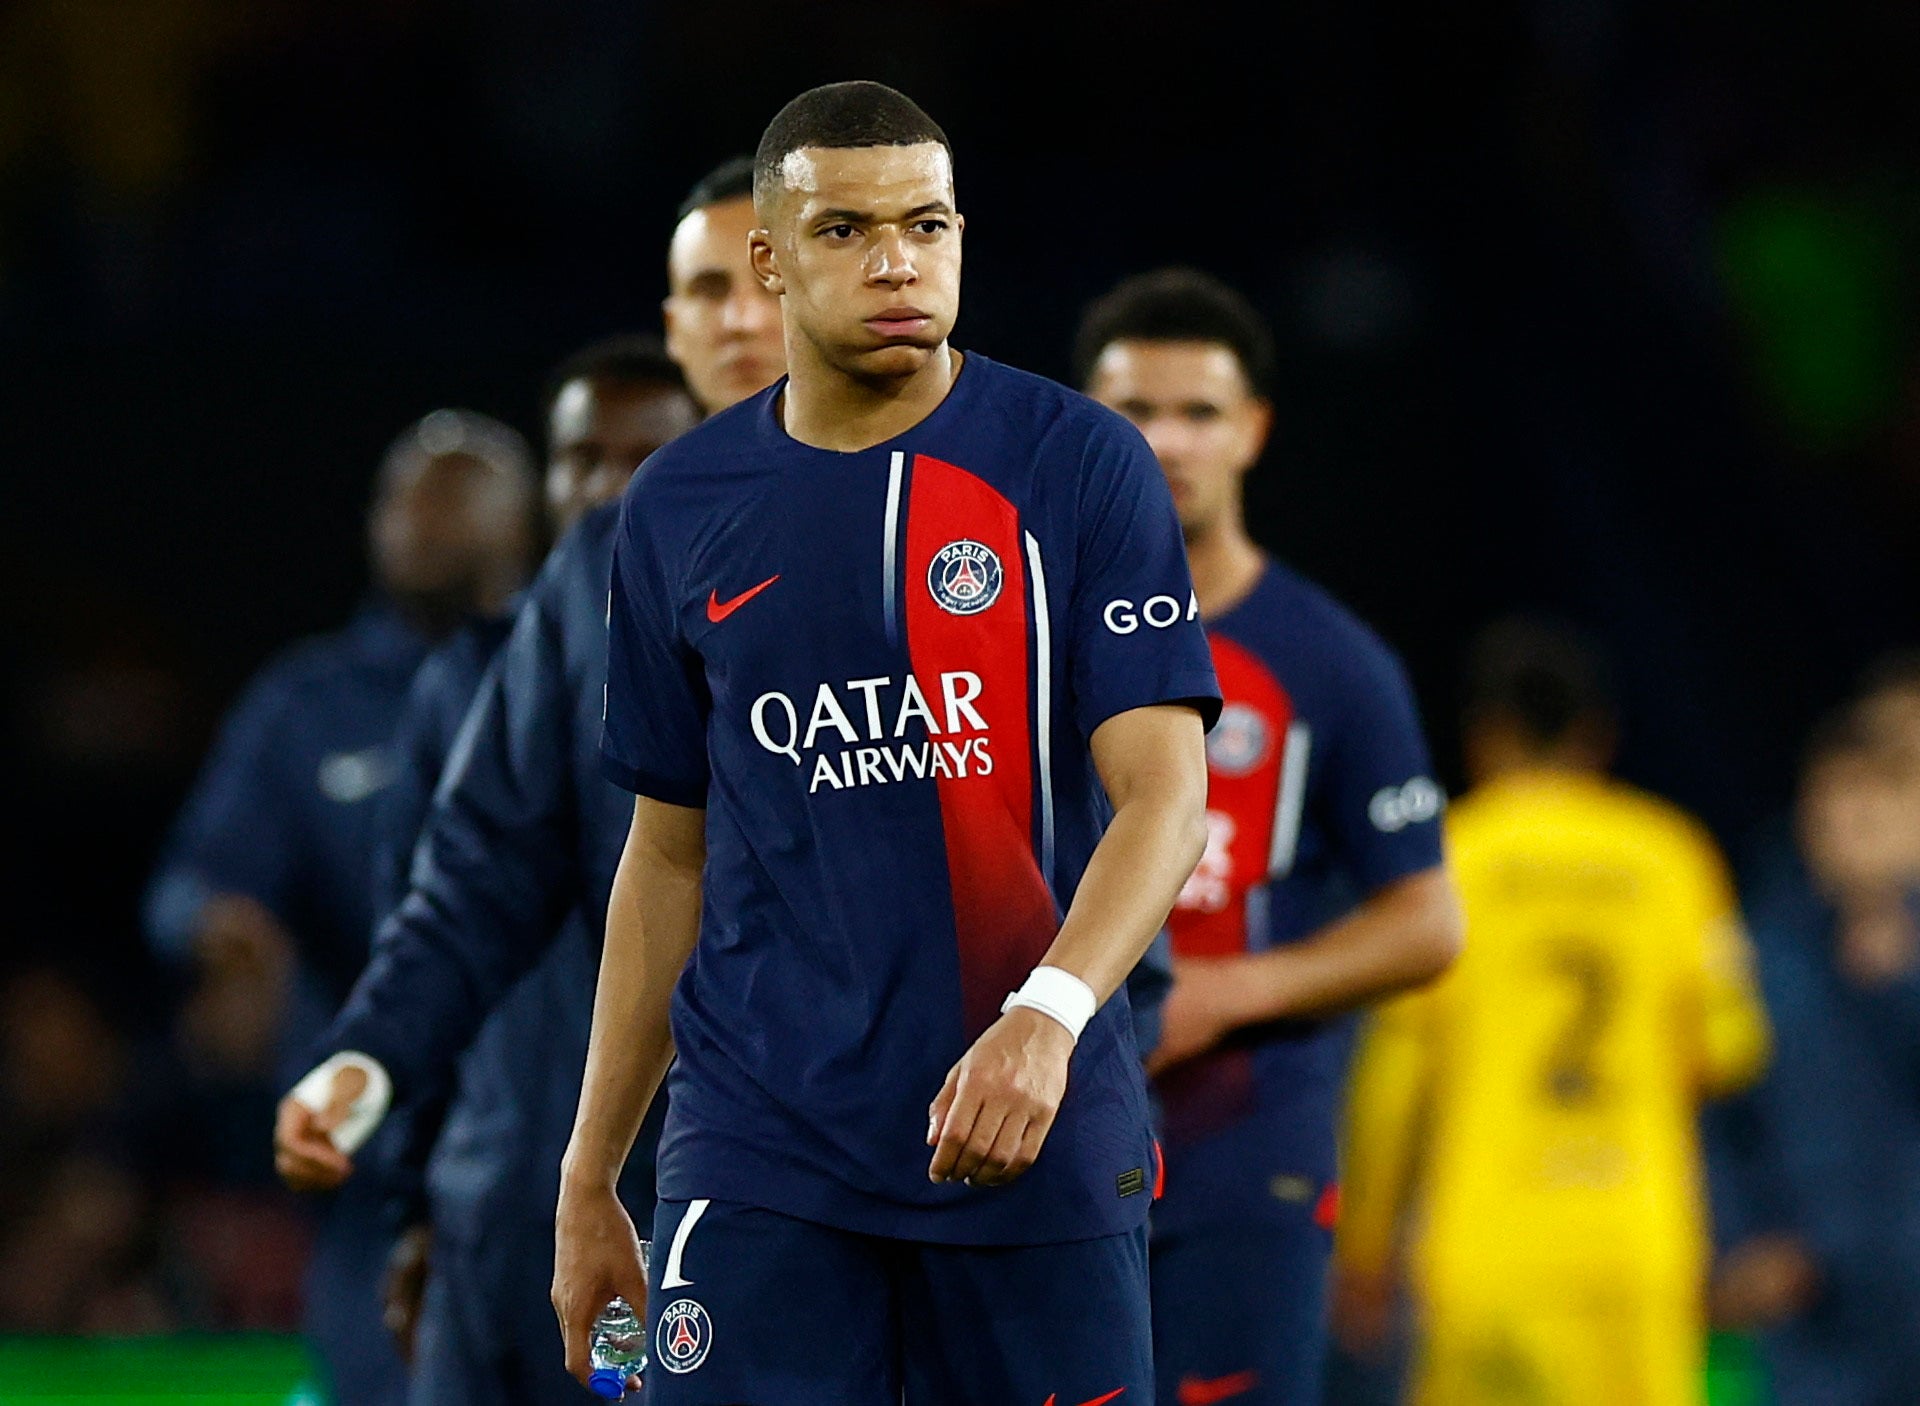 Mbappe was largely marked out of the game as Barcelona claimed an away win